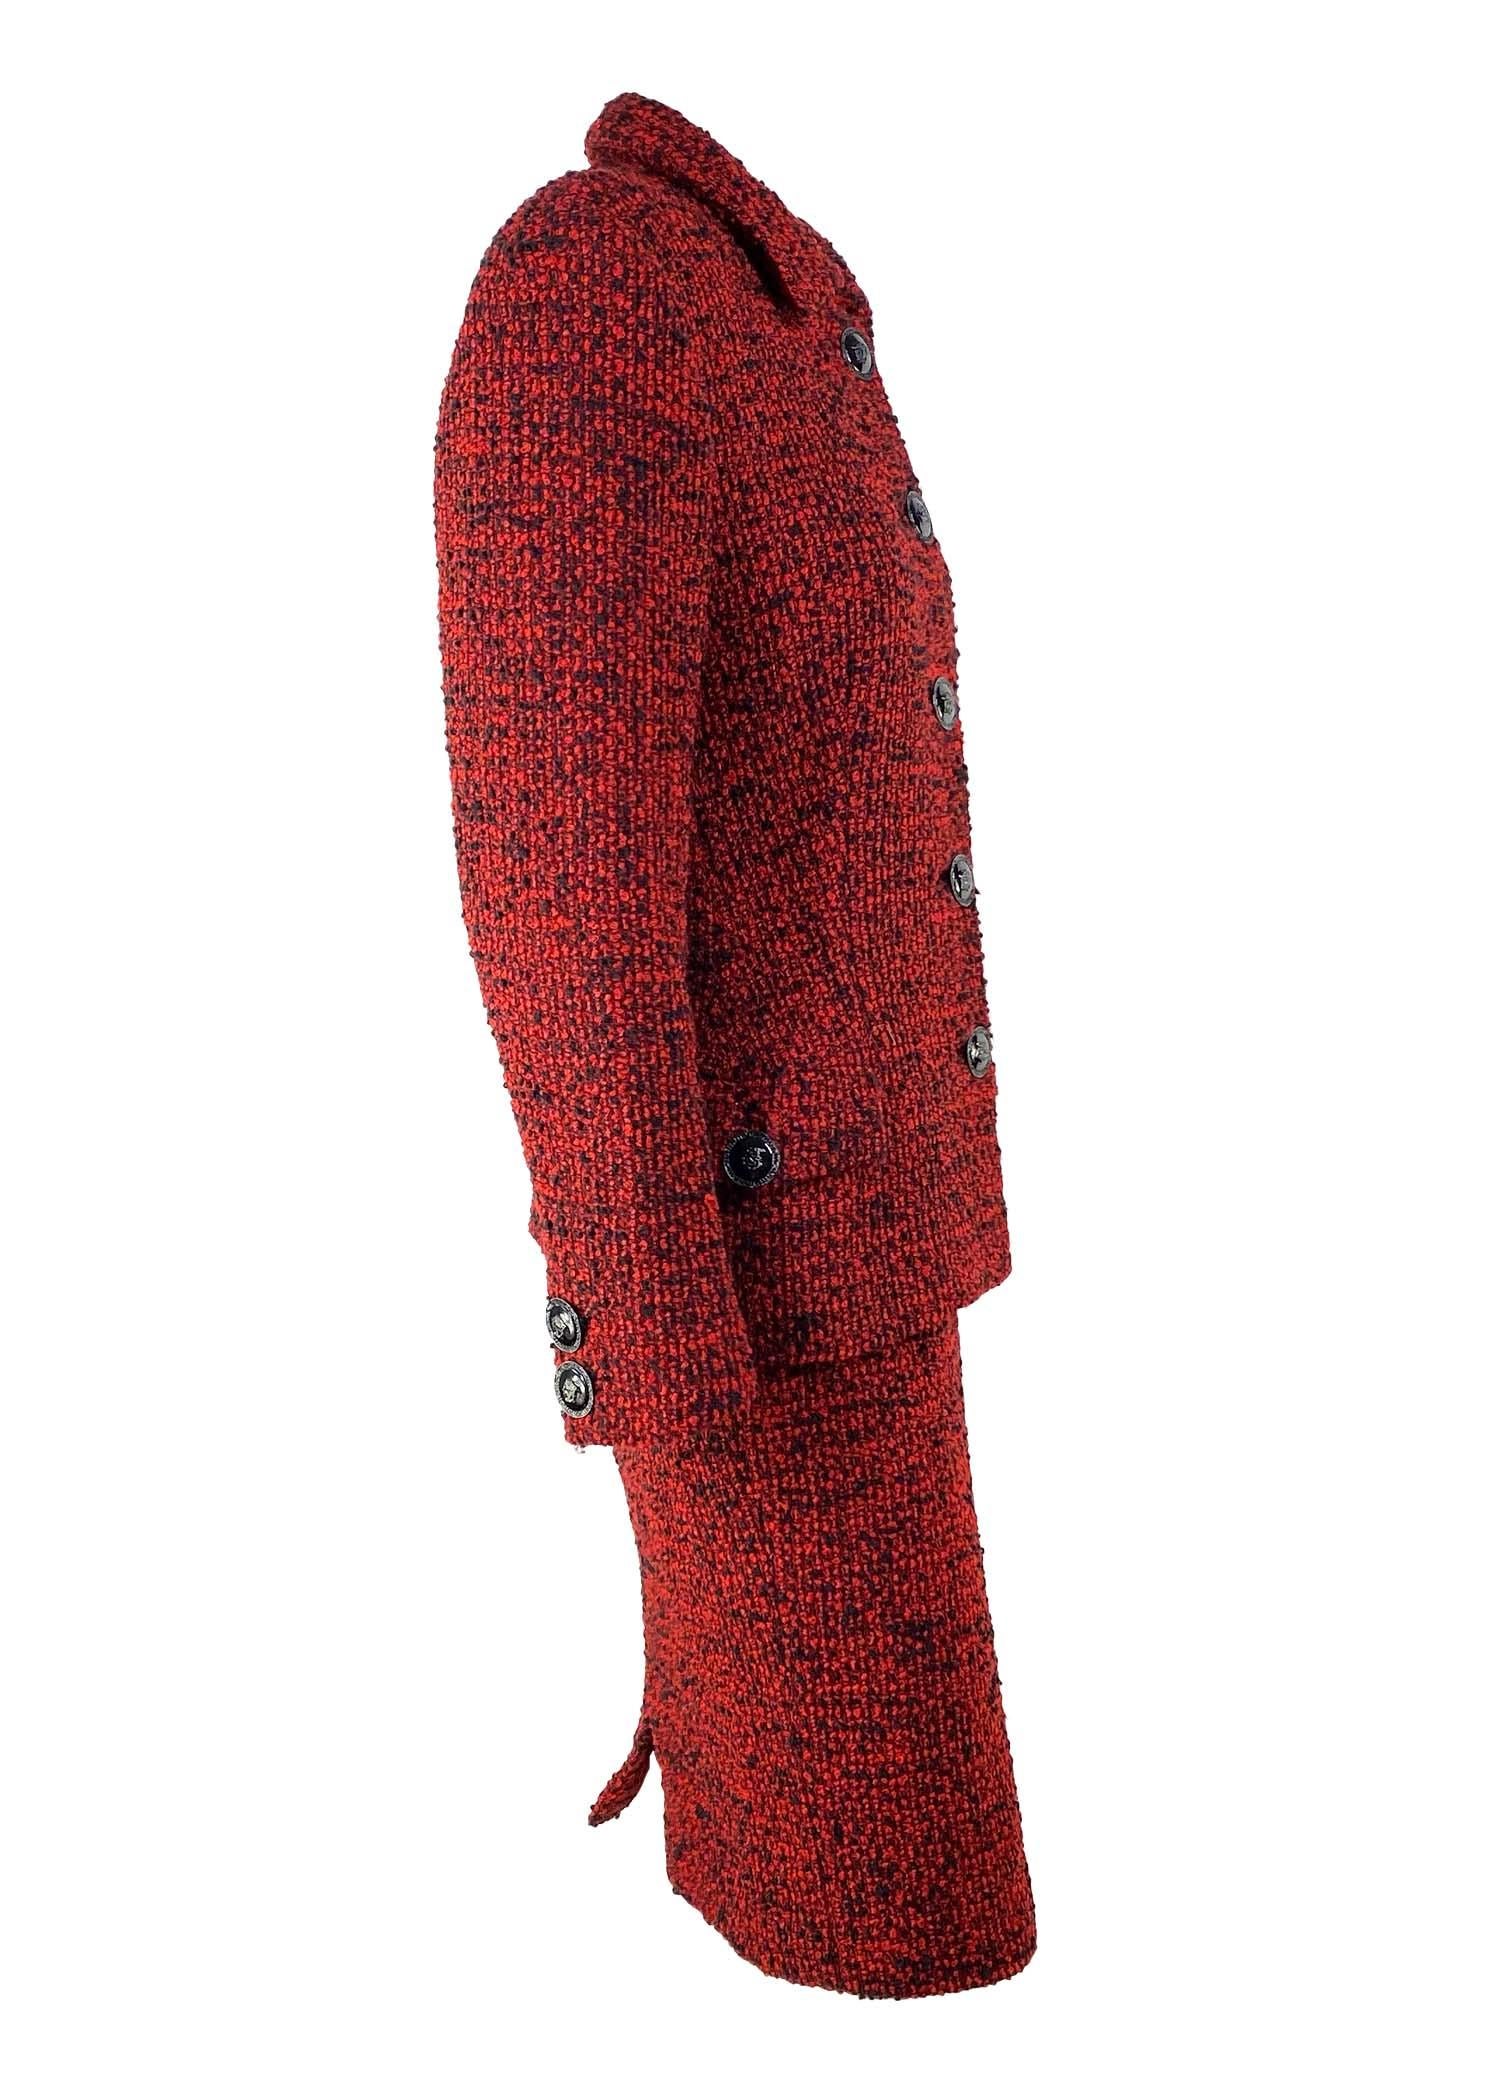 F/W 1995 Gianni Versace Couture Runway Red Bouclé Tweed Skirt Suit Documented  In Good Condition For Sale In West Hollywood, CA